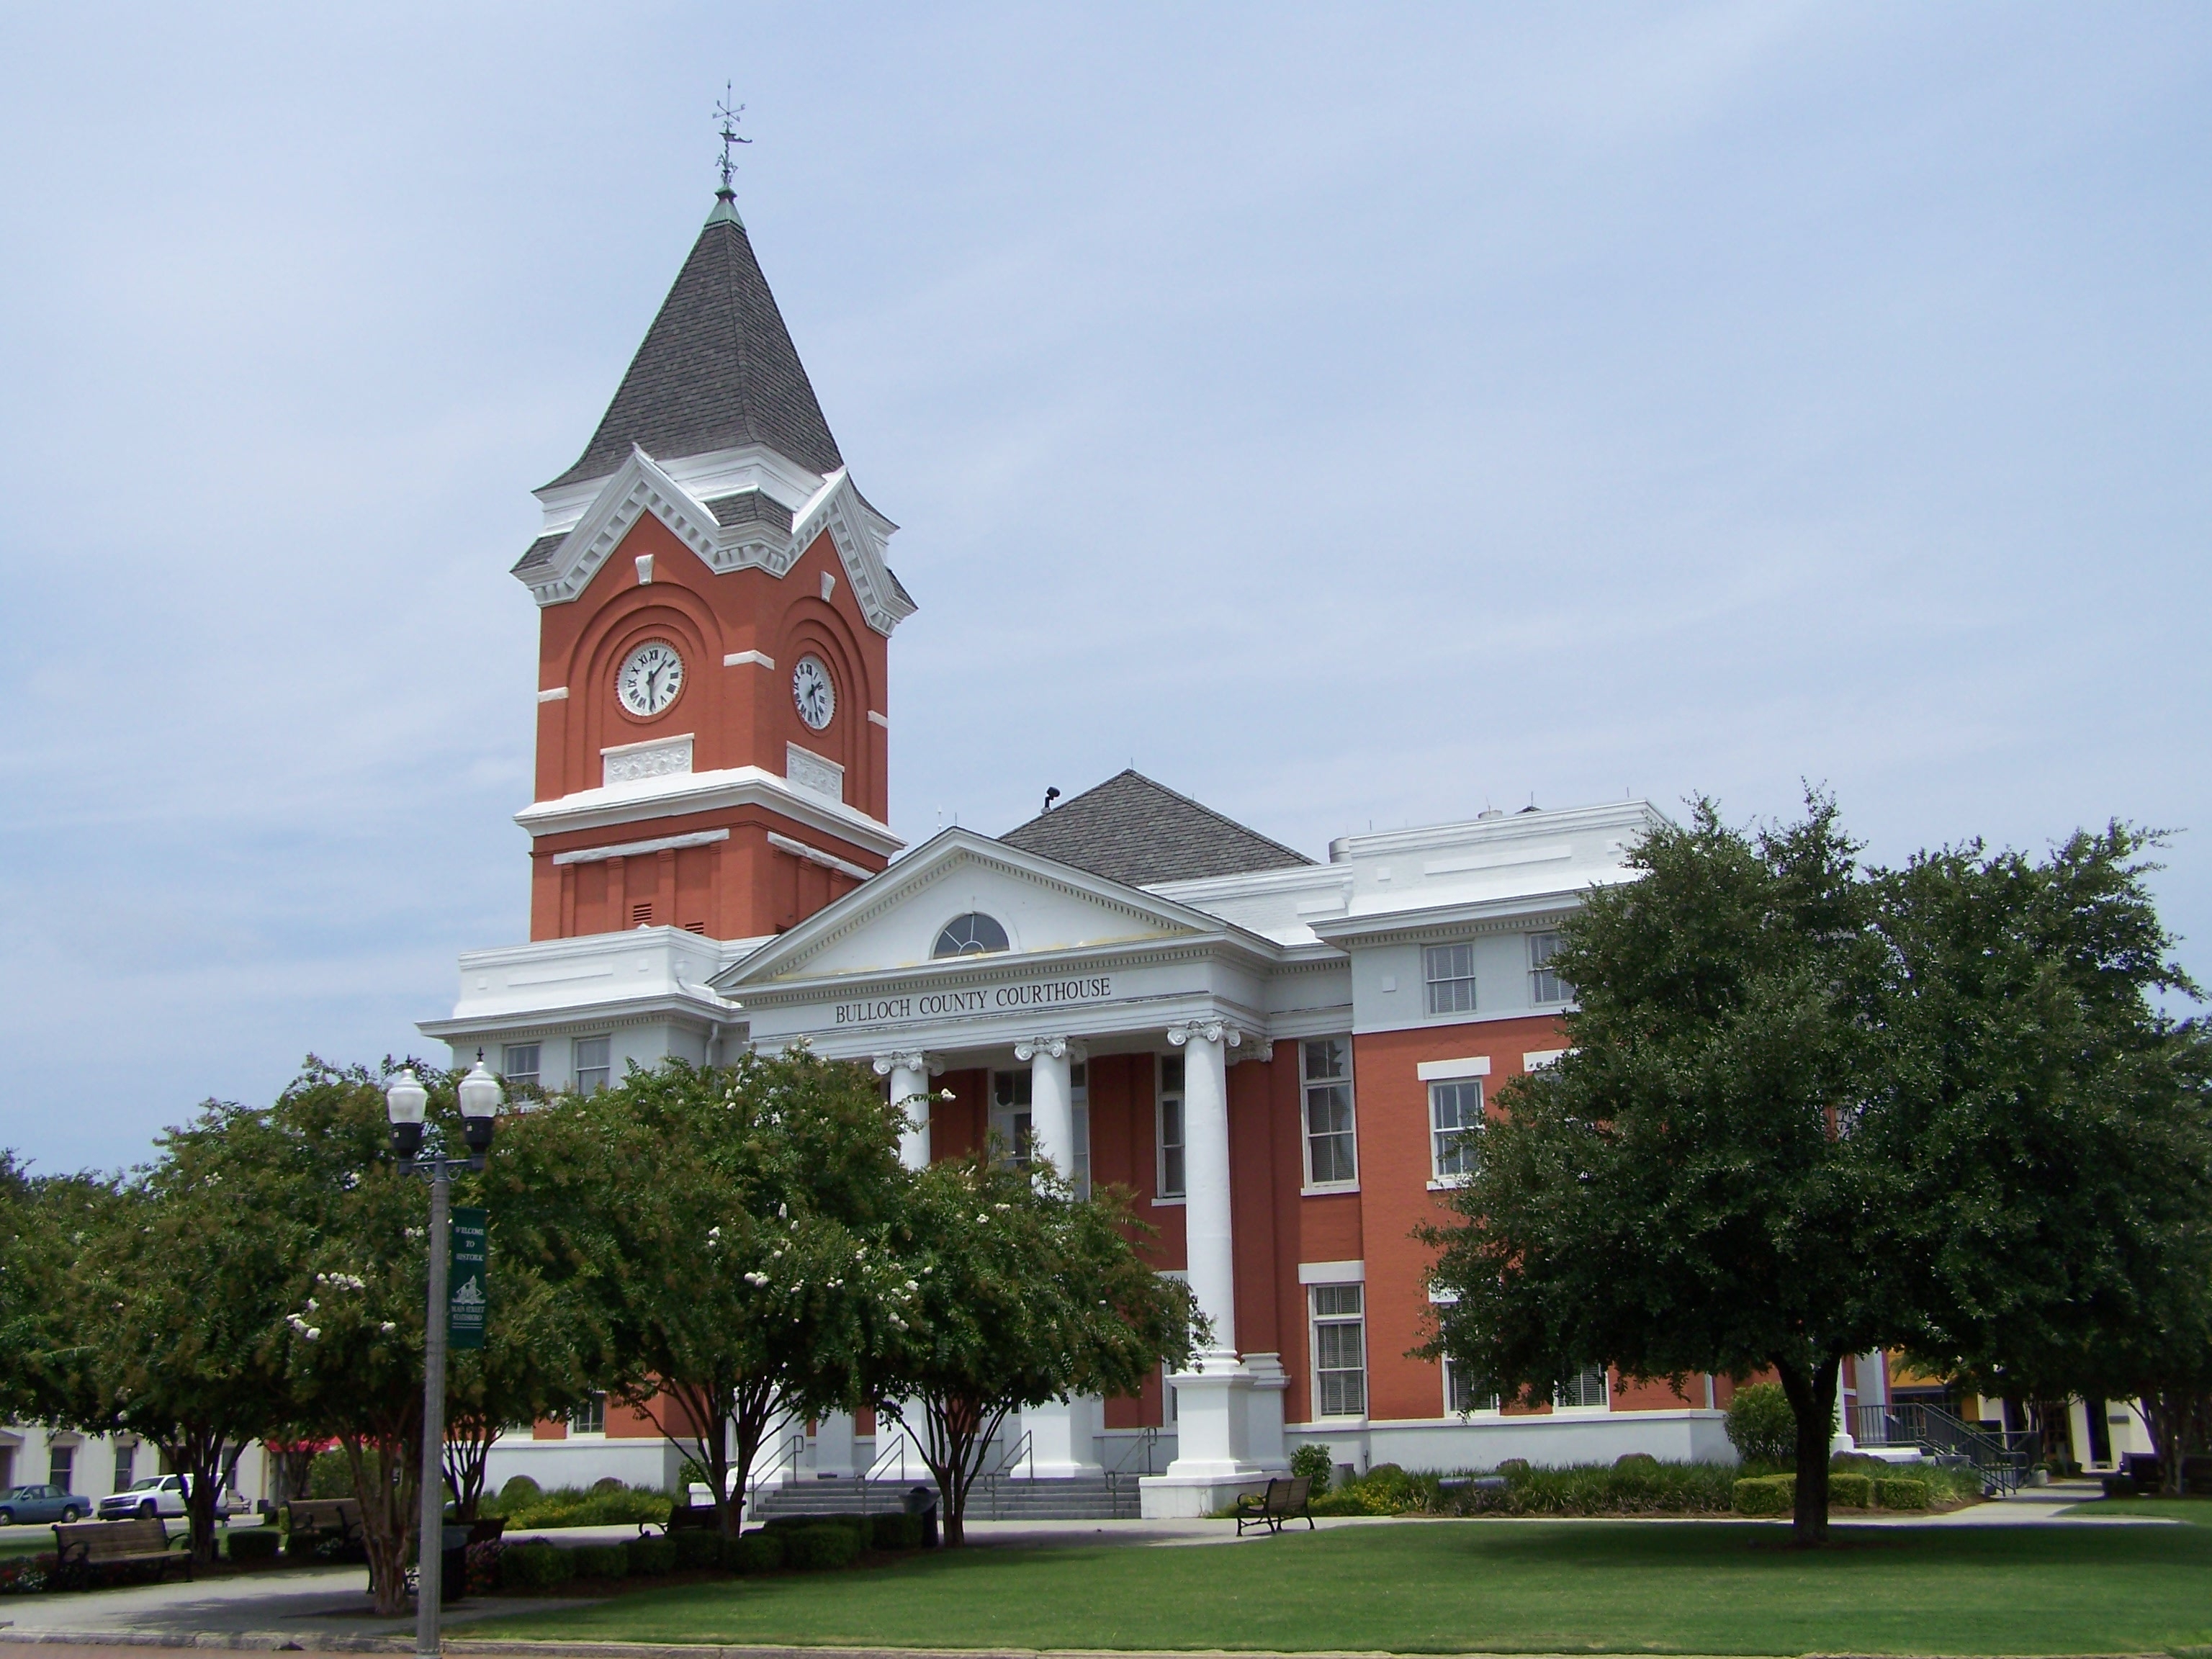 Photo: Bulloch County Courthouse at Statesboro